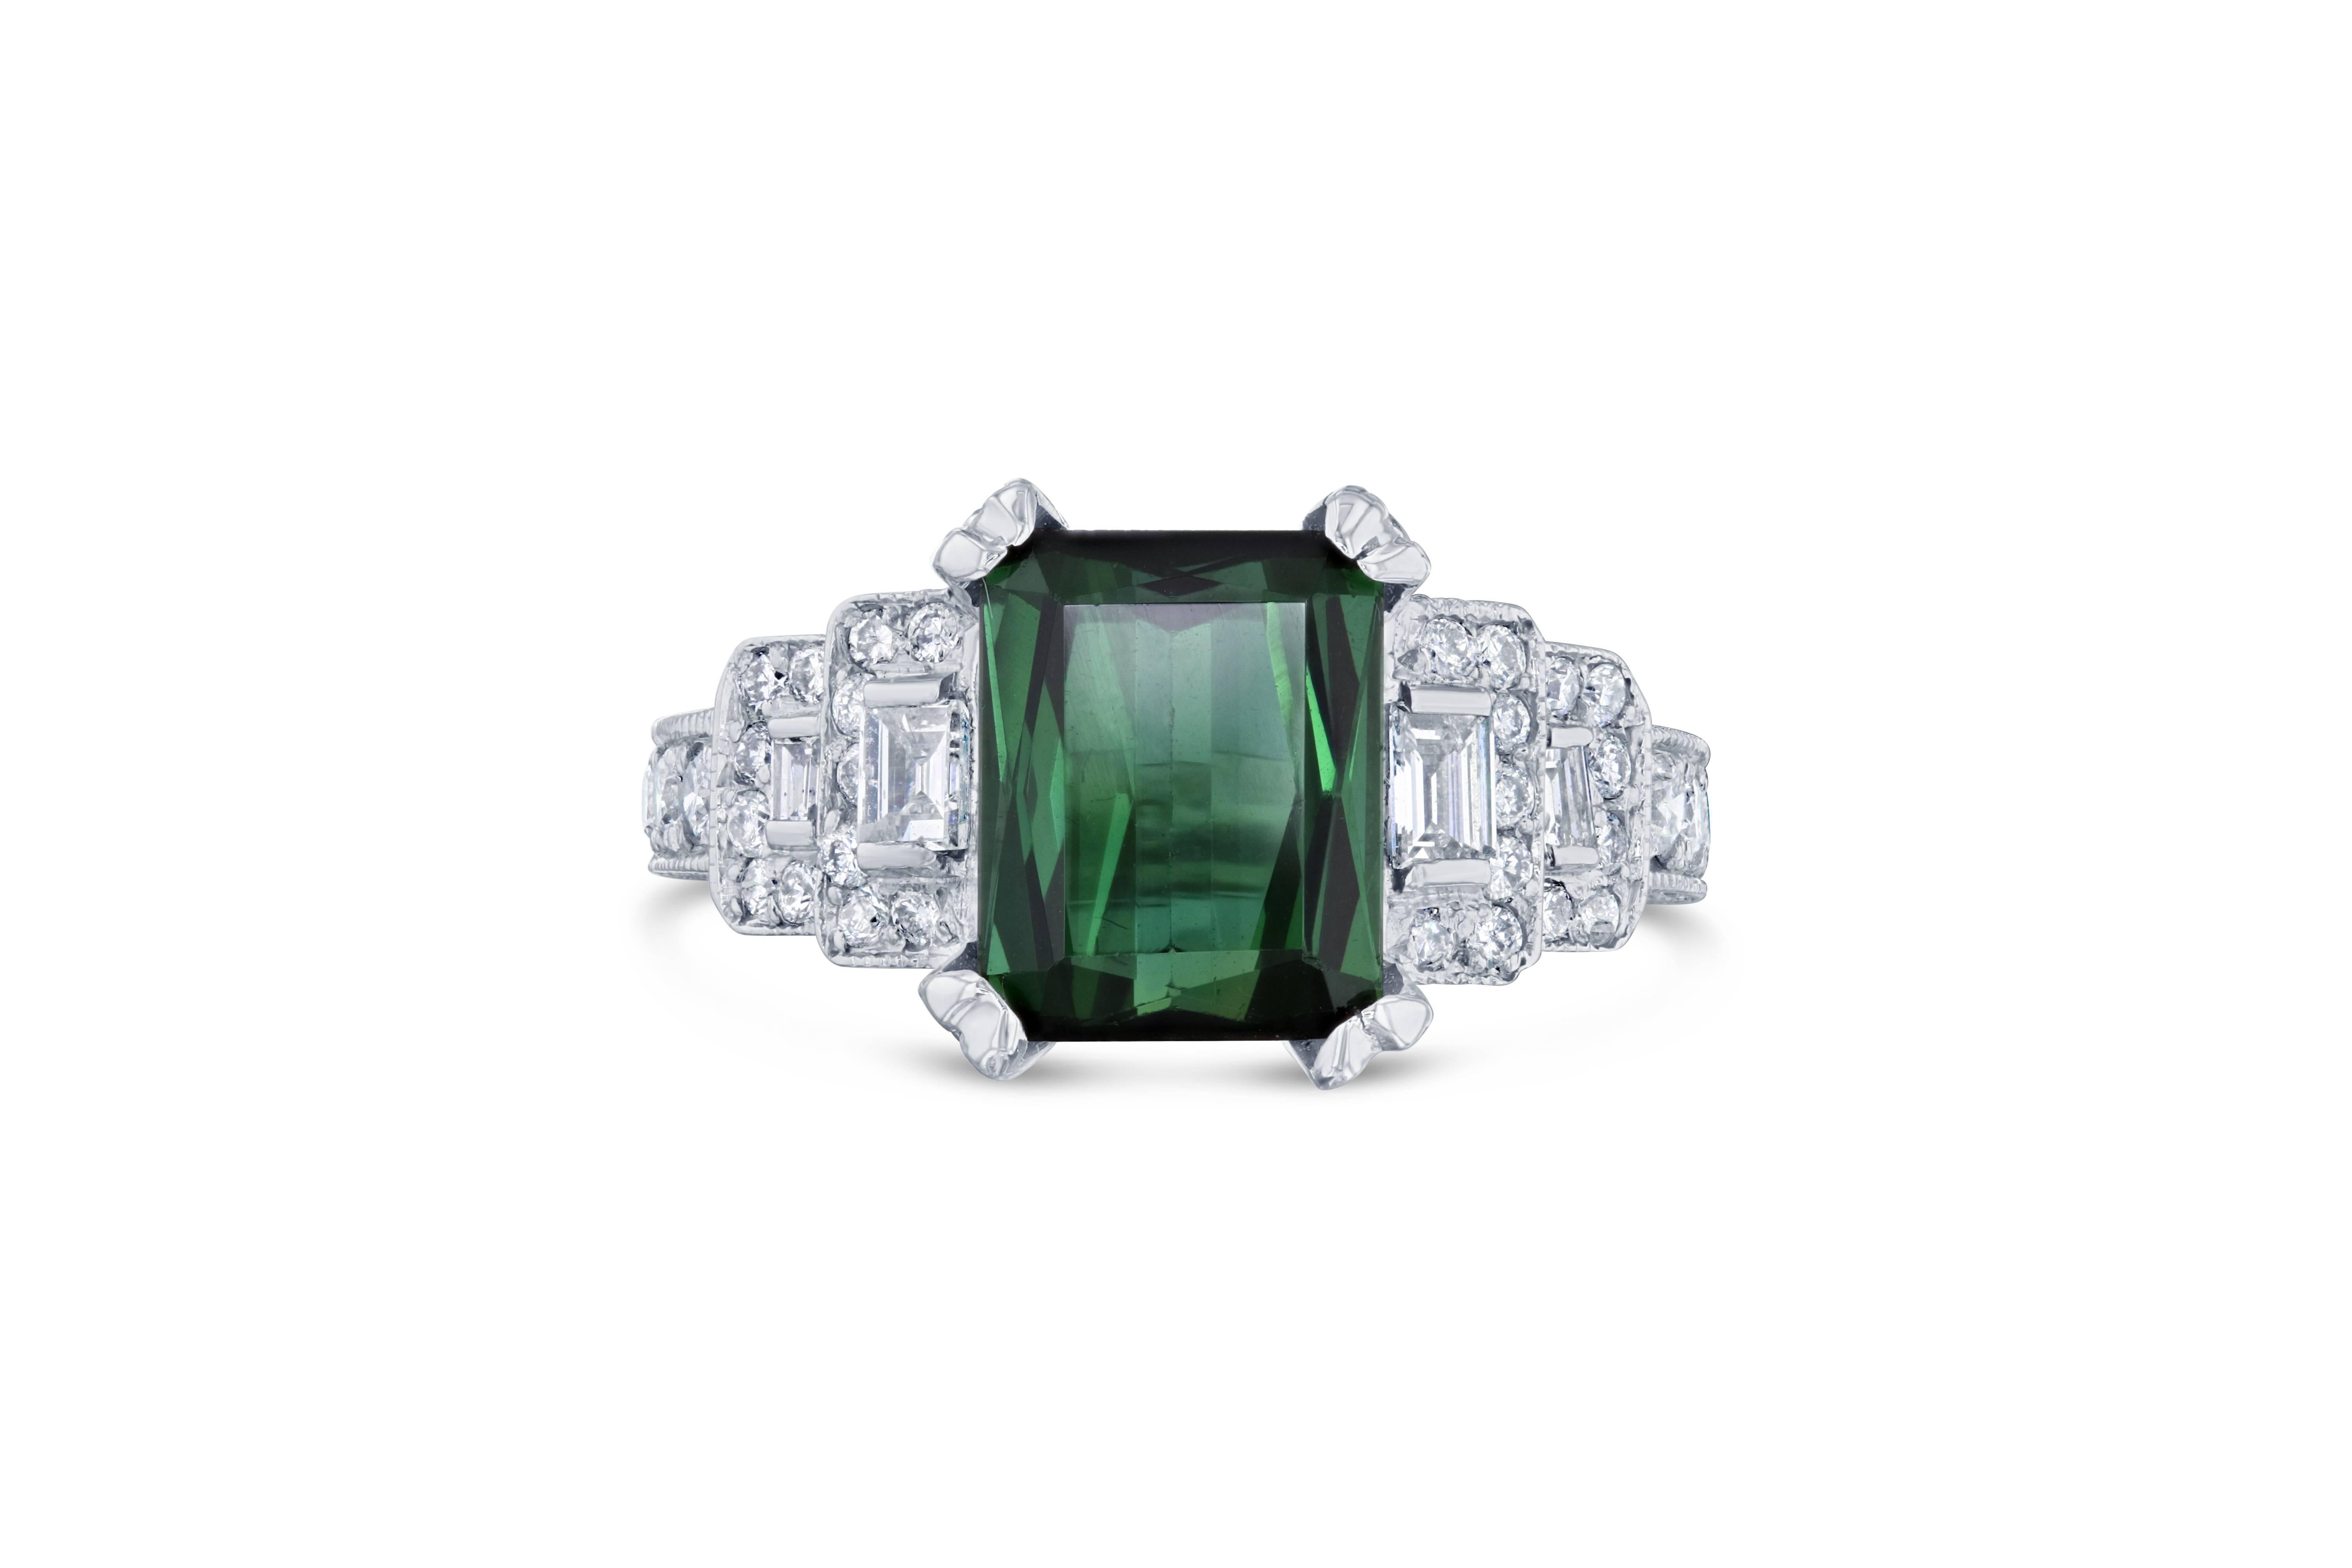 This ring has a mesmerizing Emerald cut Green Tourmaline weighing 3.71 Carats and 86 Round Cut Diamonds weighing 0.97 Carats as well as 4 Baguette Cut Diamonds weighing 0.33 Carats. The total carat weight of the ring is 5.01 Carats. 

The Emerald